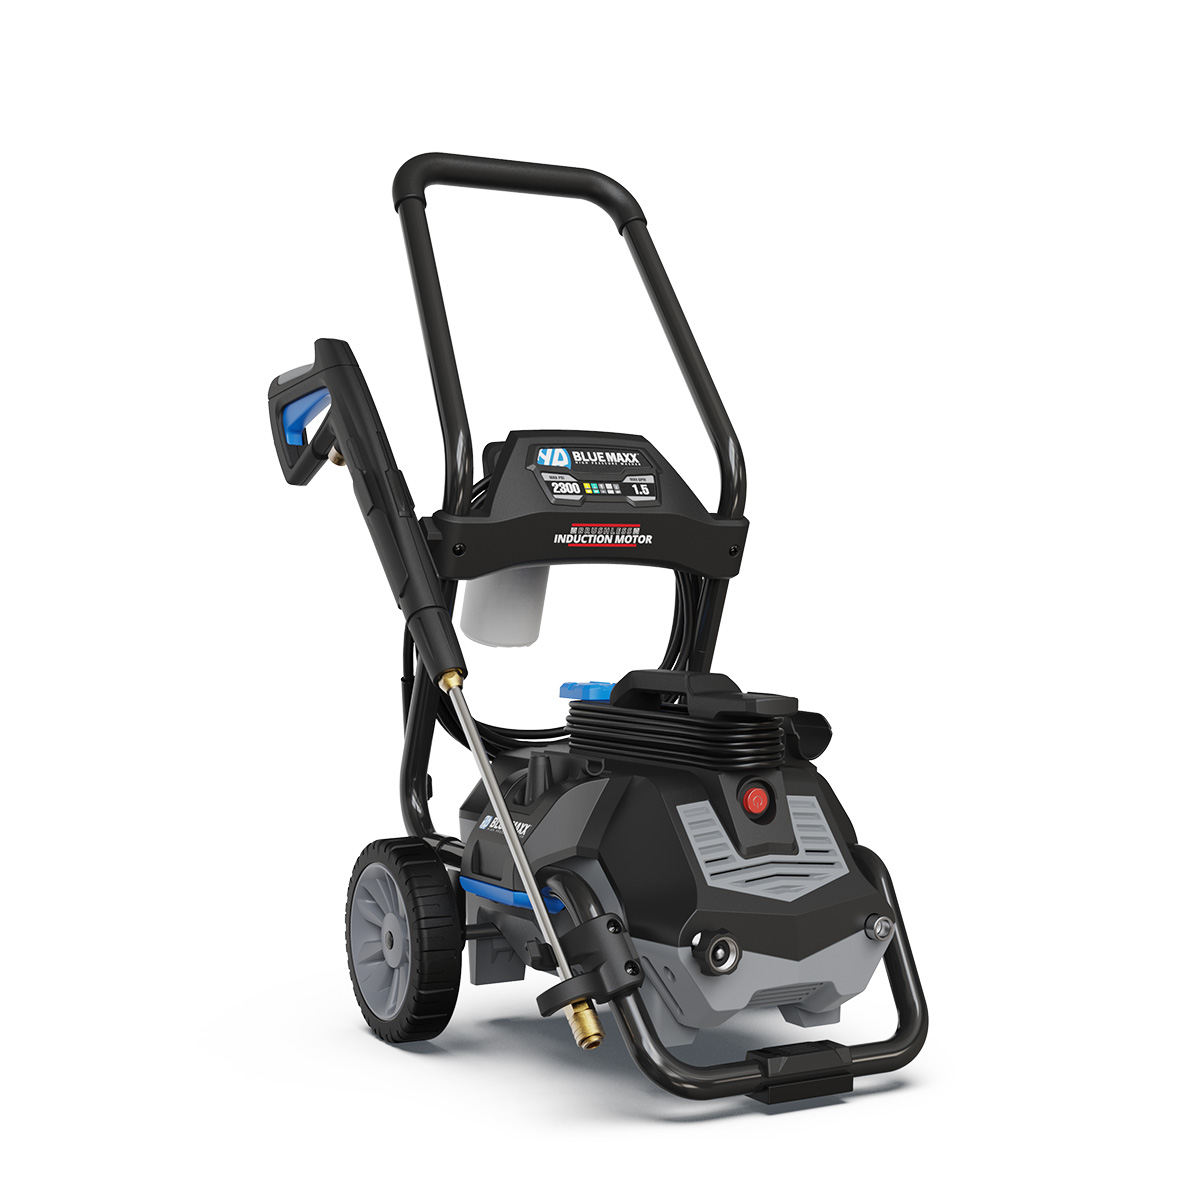 AR Blue Clean MAXX, MAXX2300, 2300 PSI, 1.5 GPM, 13 amp, Induction Motor, Electric Pressure Washer Questions & Answers